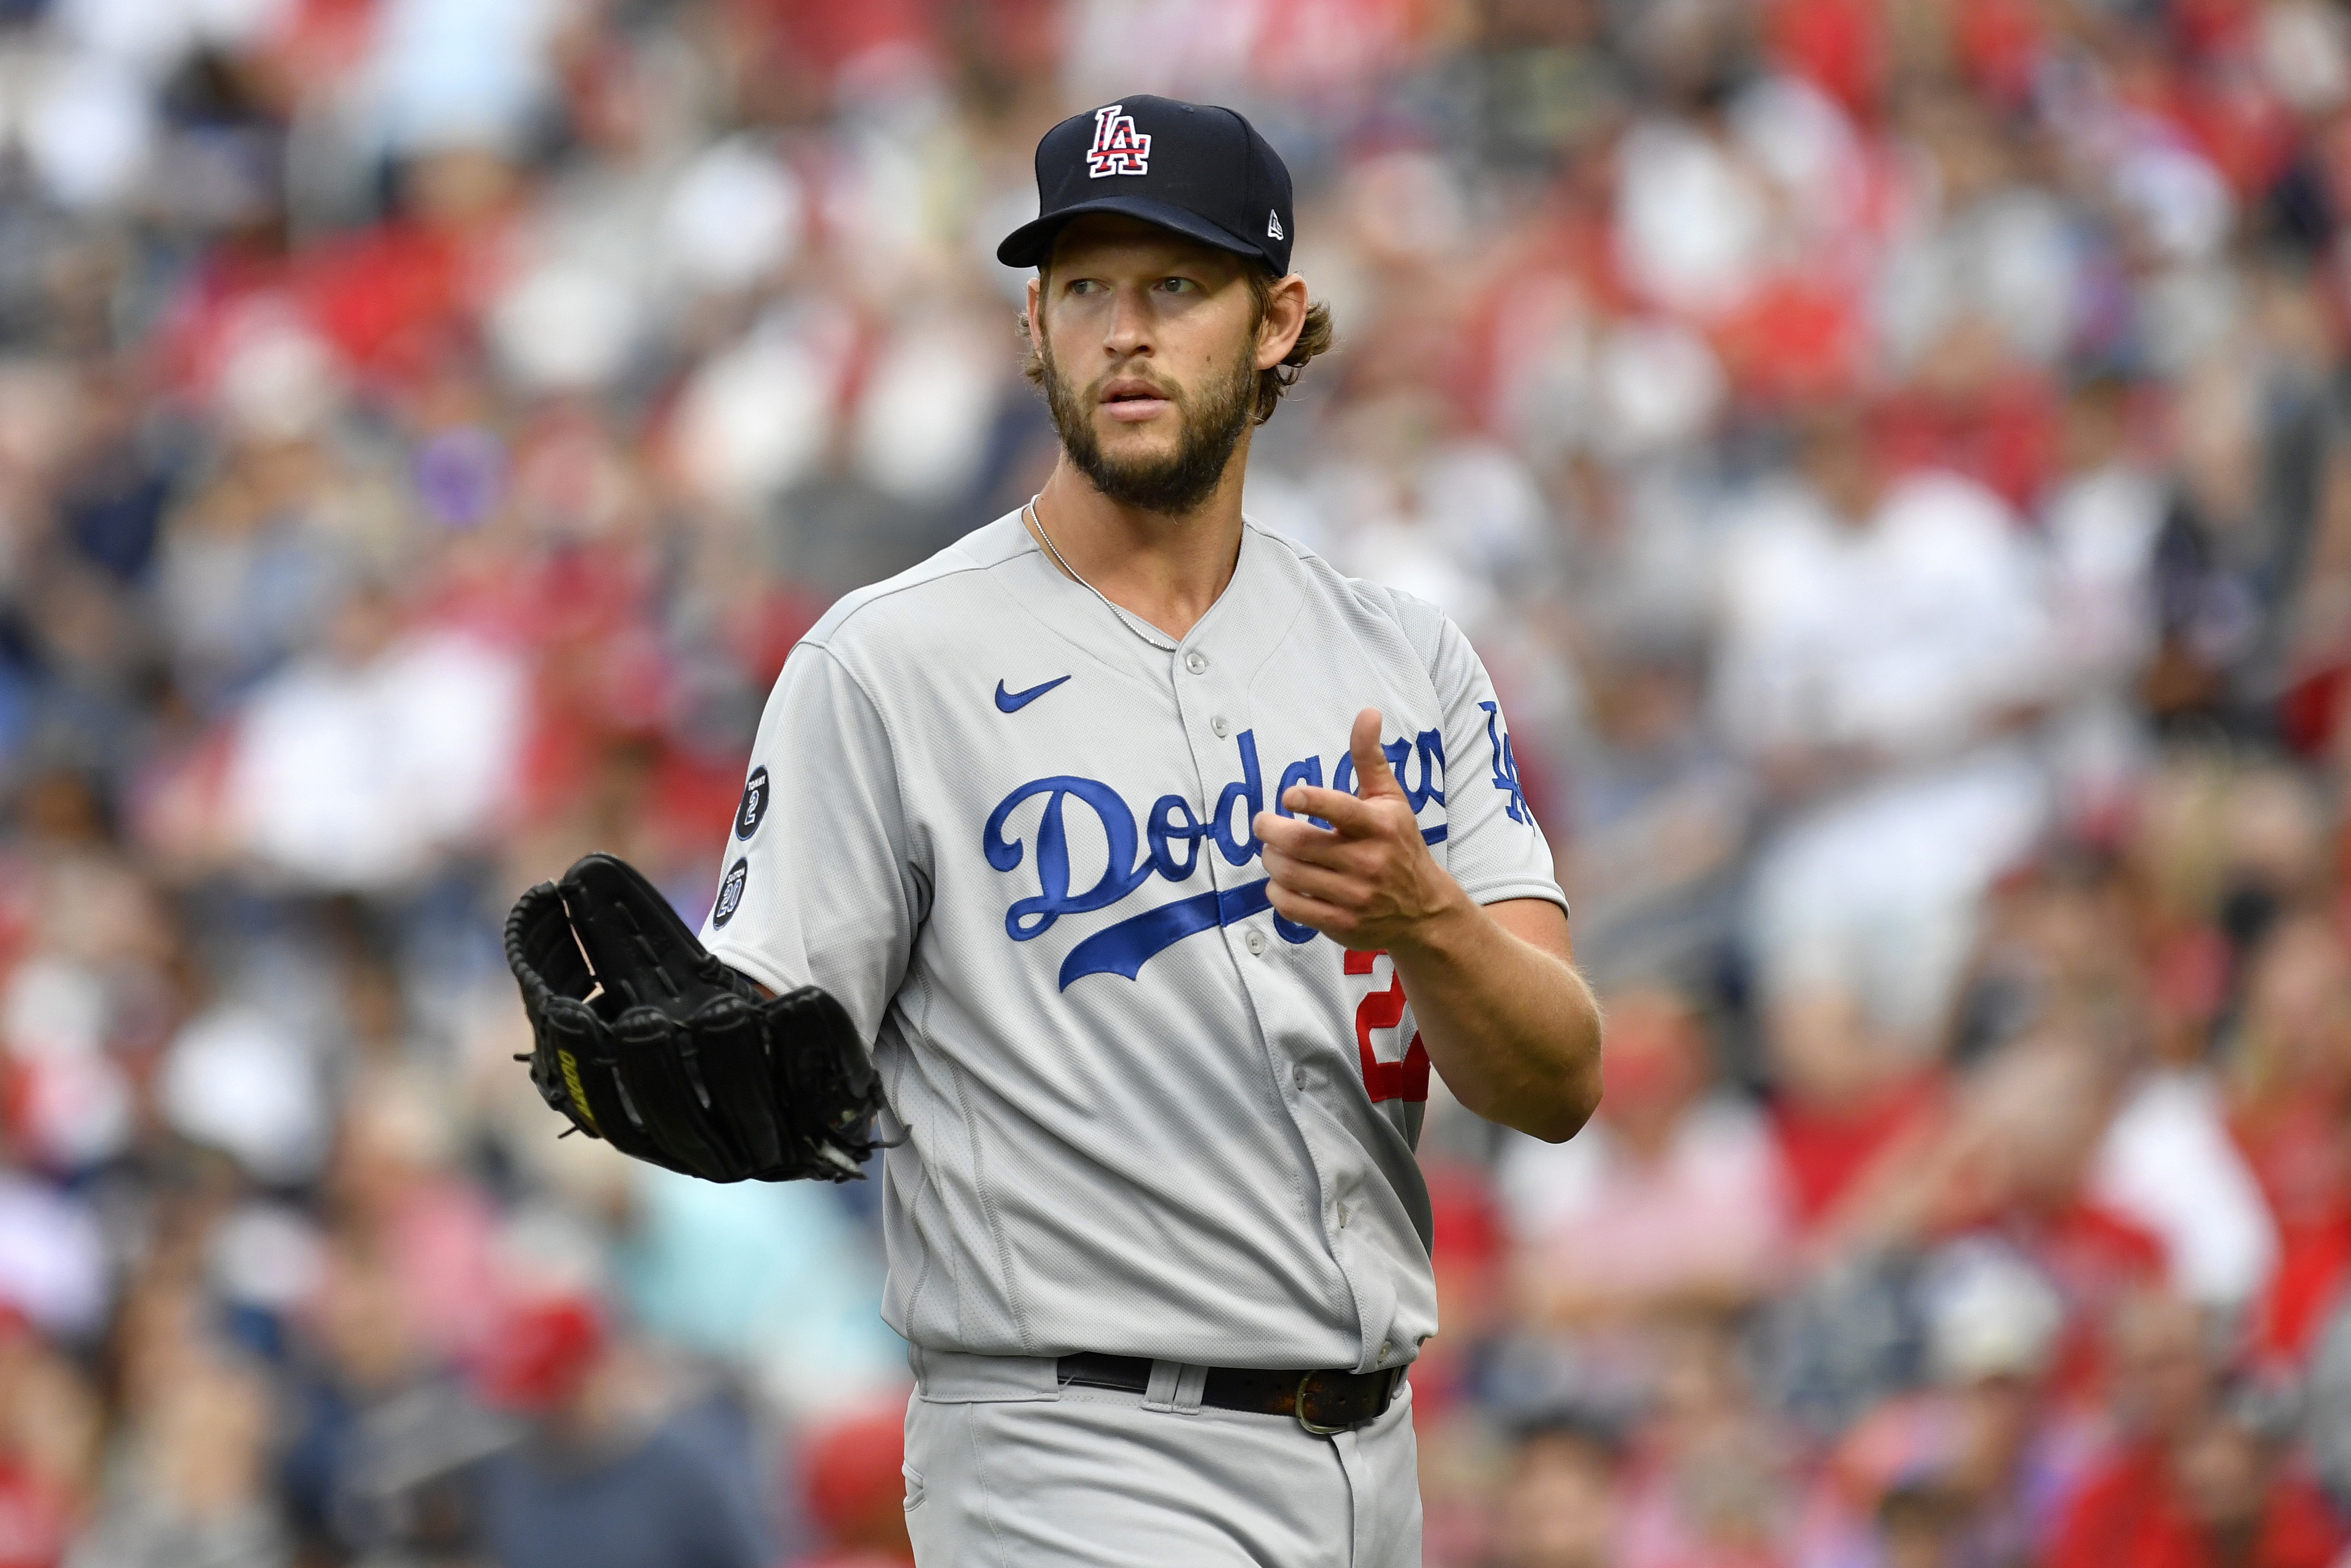 Yankees @ Dodgers June 2, 2023: Kershaw starts as Judge and Co